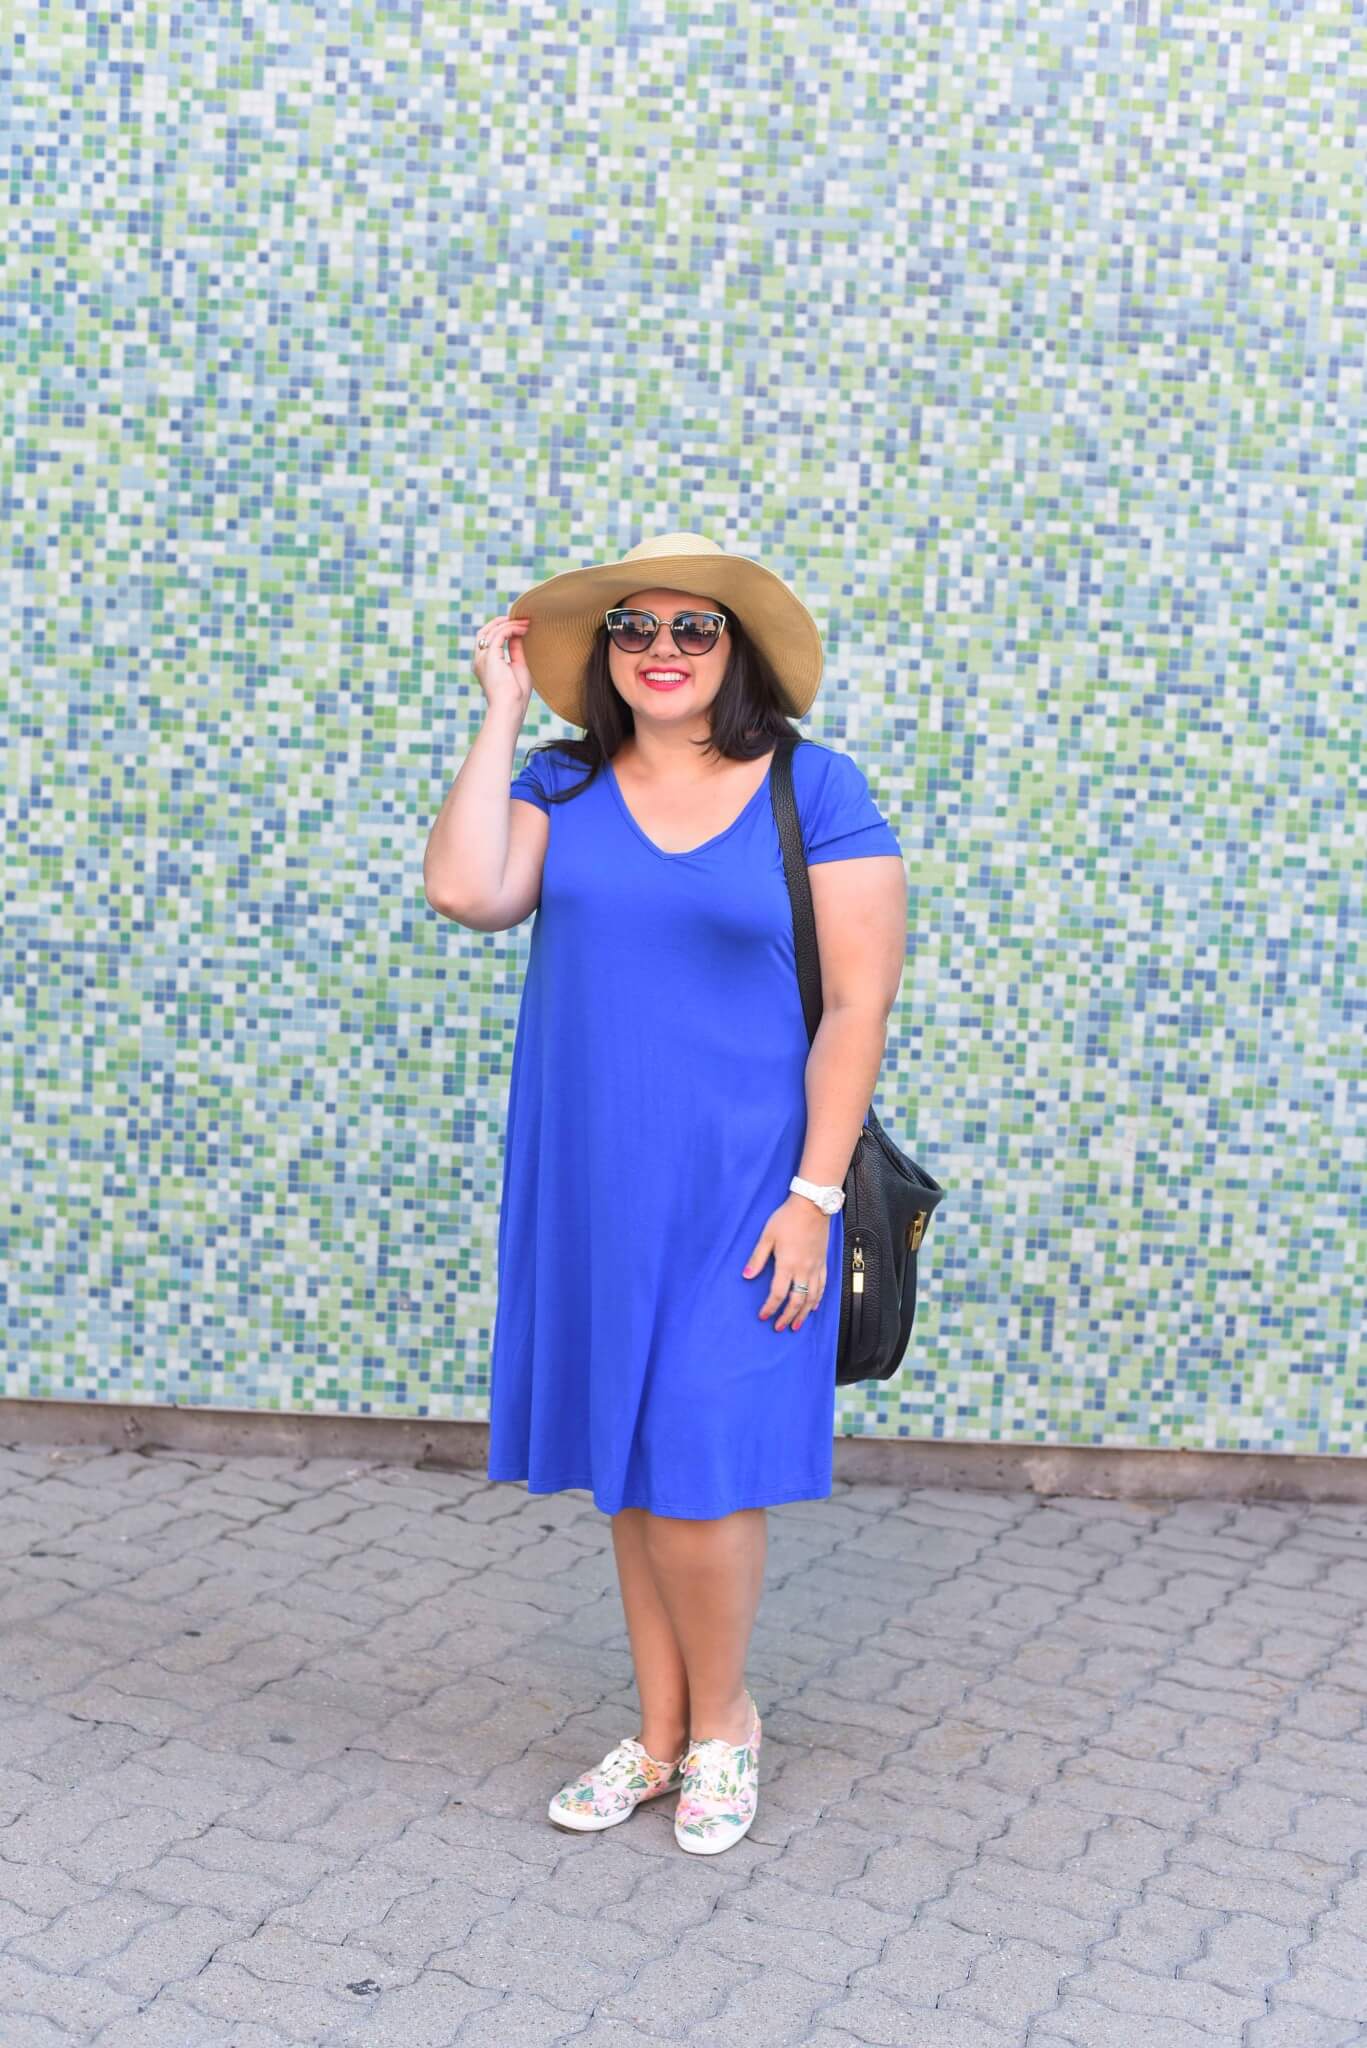 What to wear on a summer weekend day for being a tourist in your own city. A chic summer dress, an adorable printed pair of sneakers and a hat create an eyecatching look. #plussize #plussizeblogger #summerstyle #summerdress